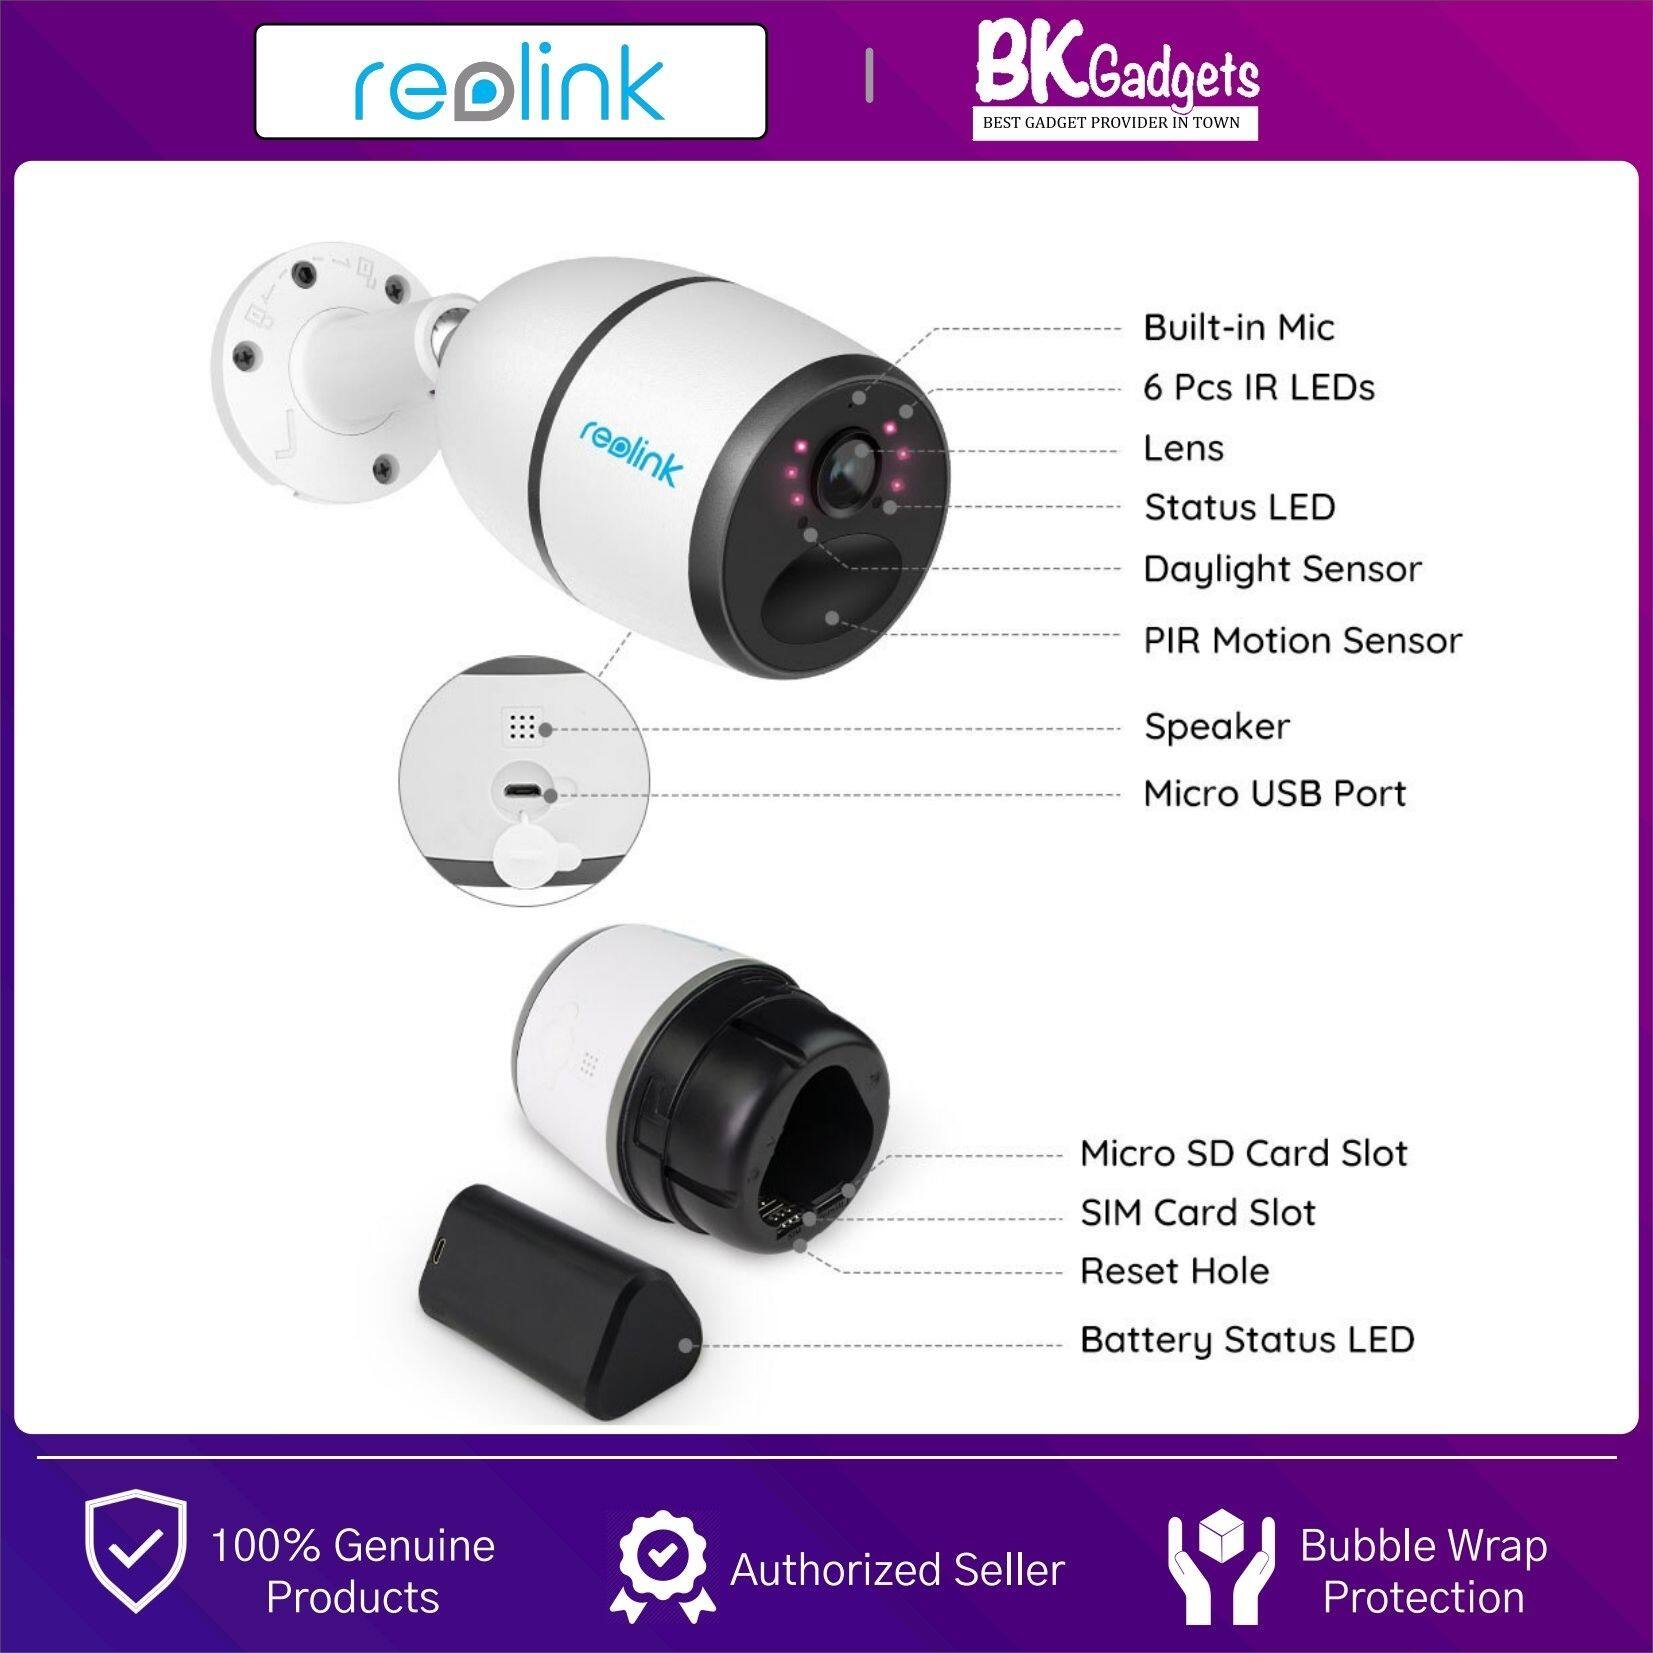 Reolink GO 1080P Full HD 4G LTE Mobile Security IP Camera CCTV - CMOS | 110 Diagonal | 7800mAh Rechargeable Battery | 2 Way Audio | Night Vision 10m | Pan & Tilt | PIR Motion Detect | Outdoor IP65